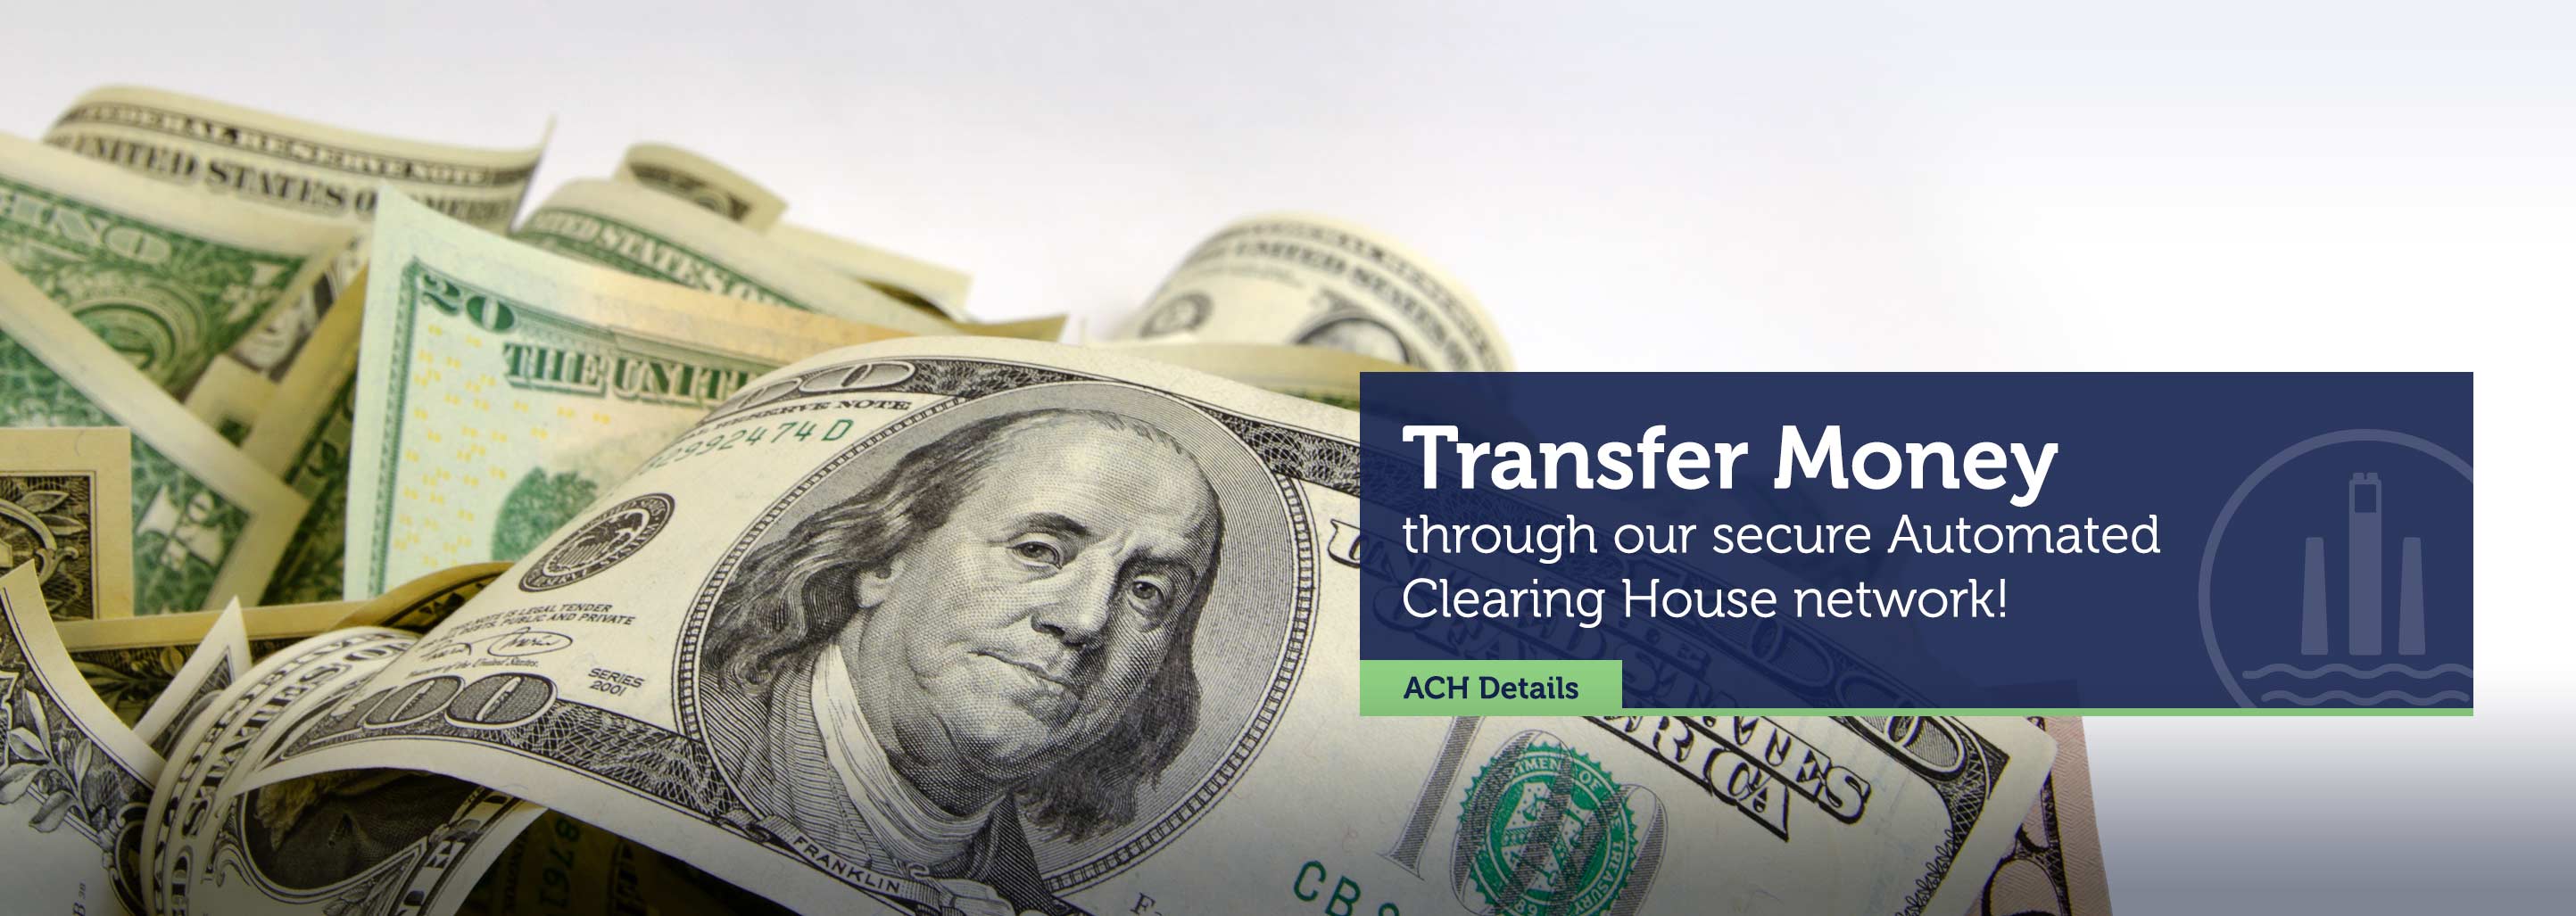 Transfer Money through our secure Automated Clearing House Network! ACH Details